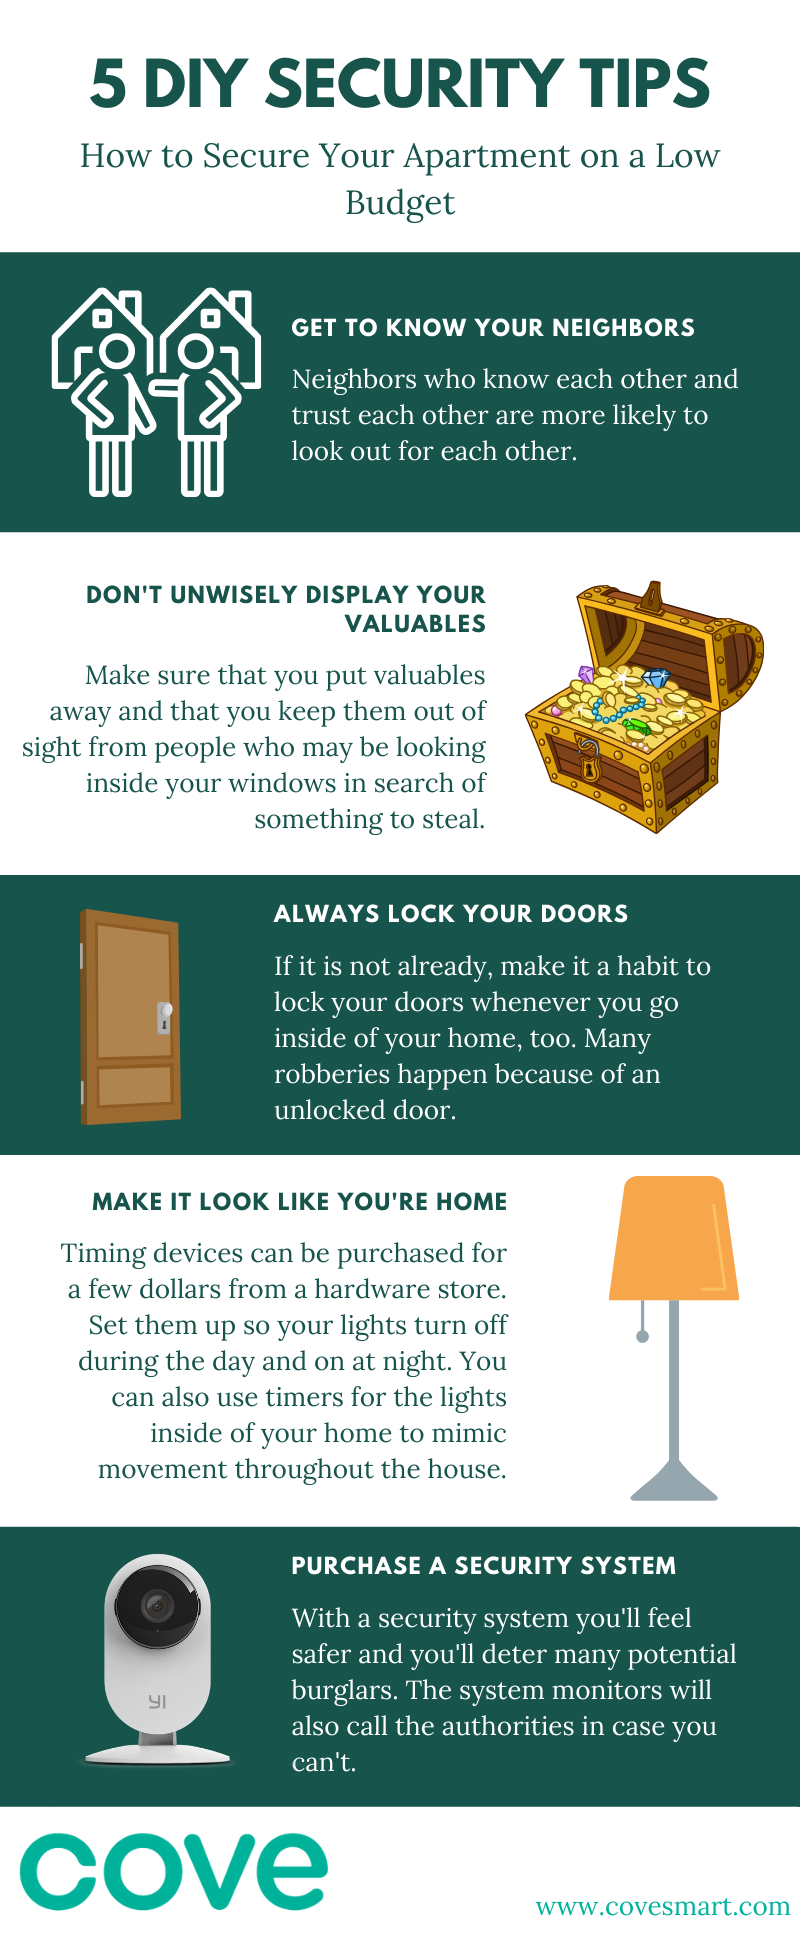 5 DIY Security Tips Infographic. Get to know your neighbors, don't display valuables, install a home security system, etc.